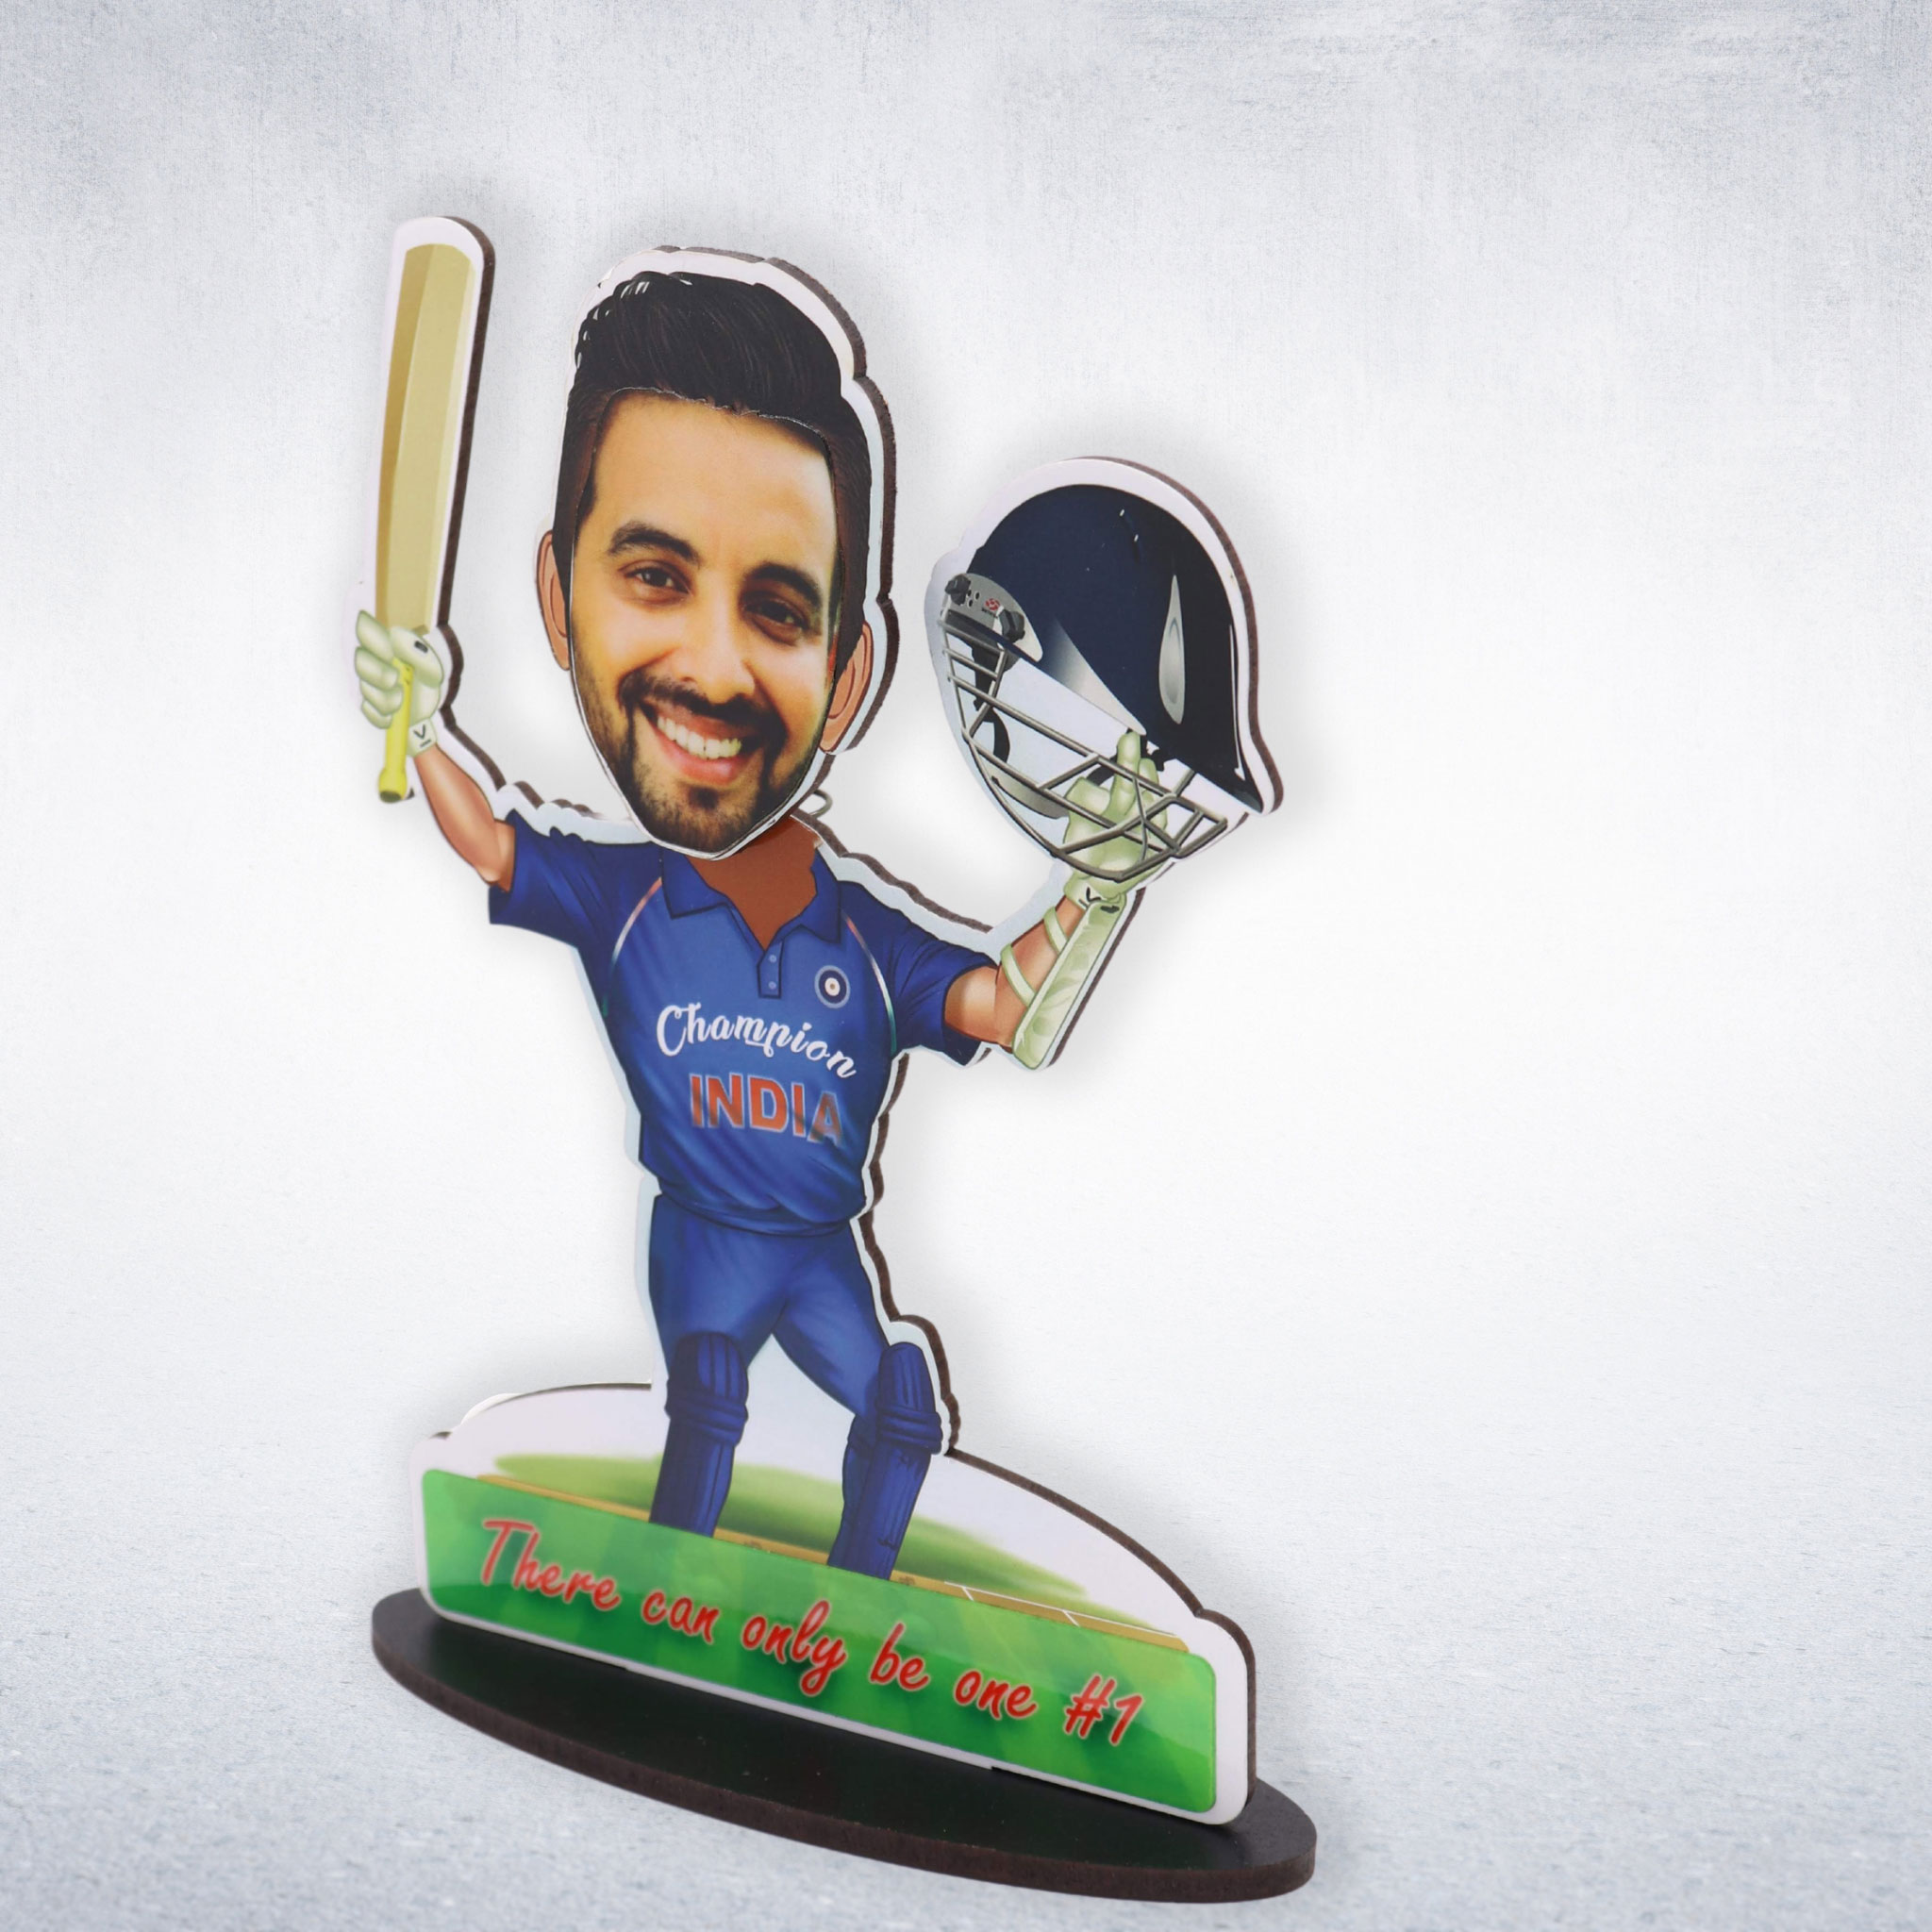 Personalized Superboy Caricature with Wooden Stand